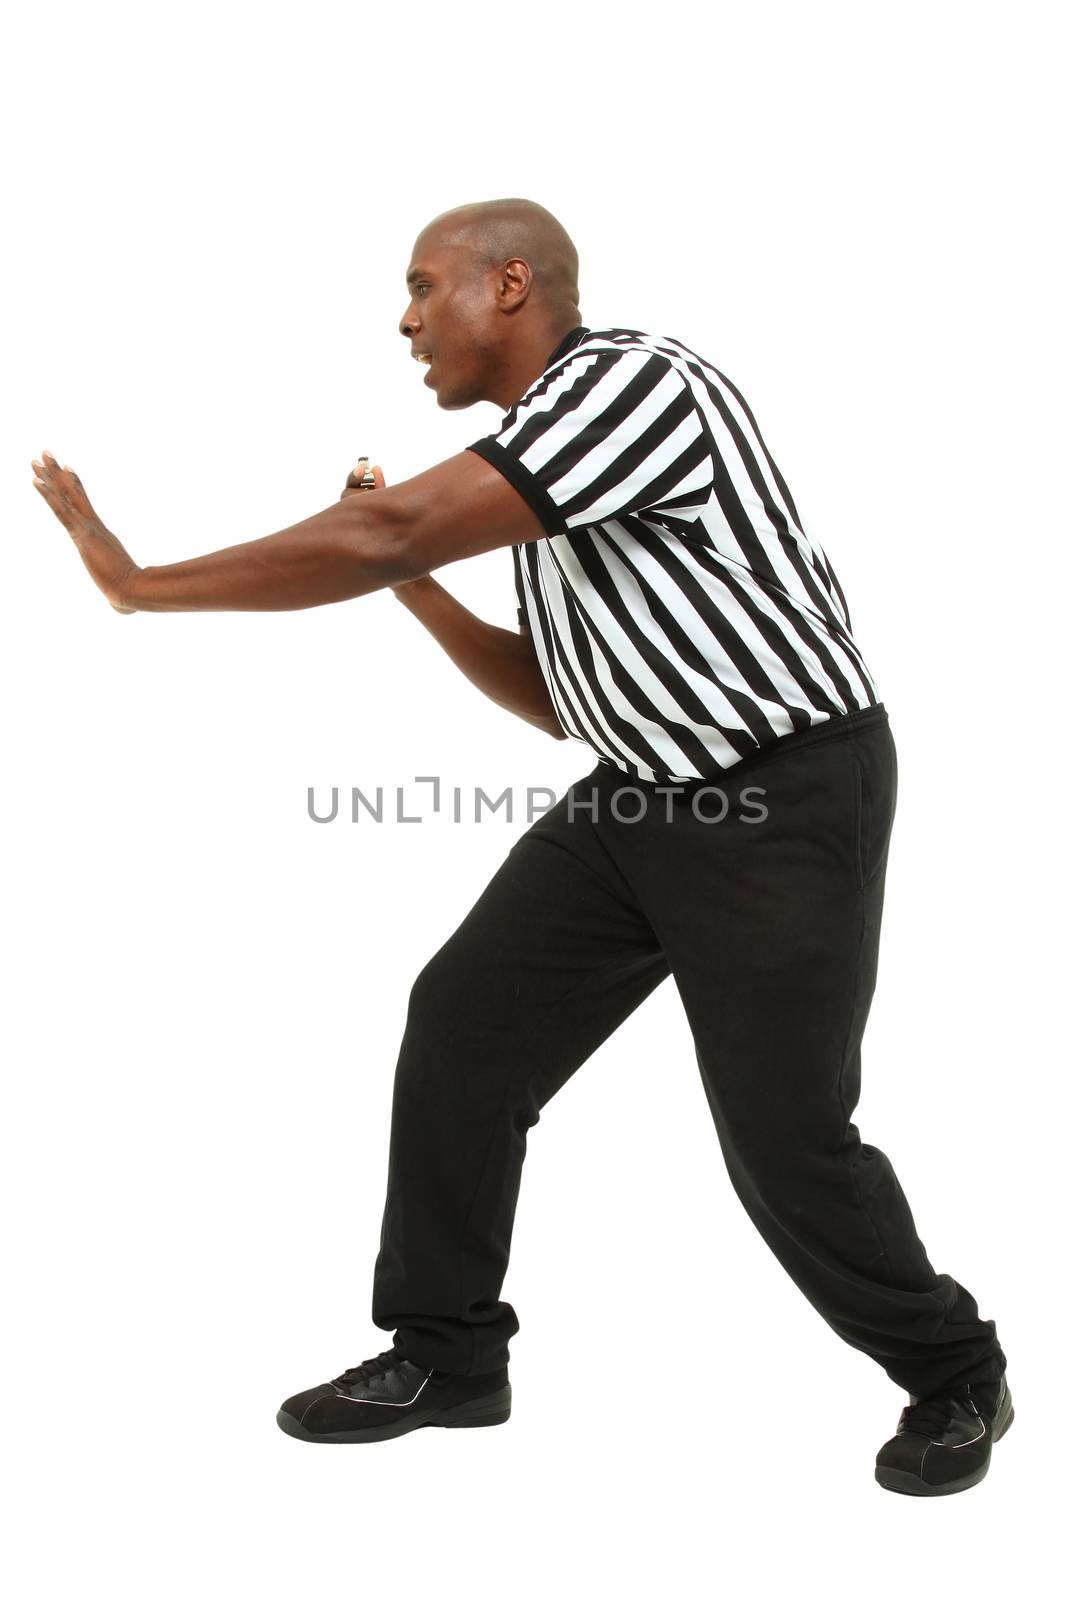 Attractive fit black man in referee uniform facing side and yell by duplass